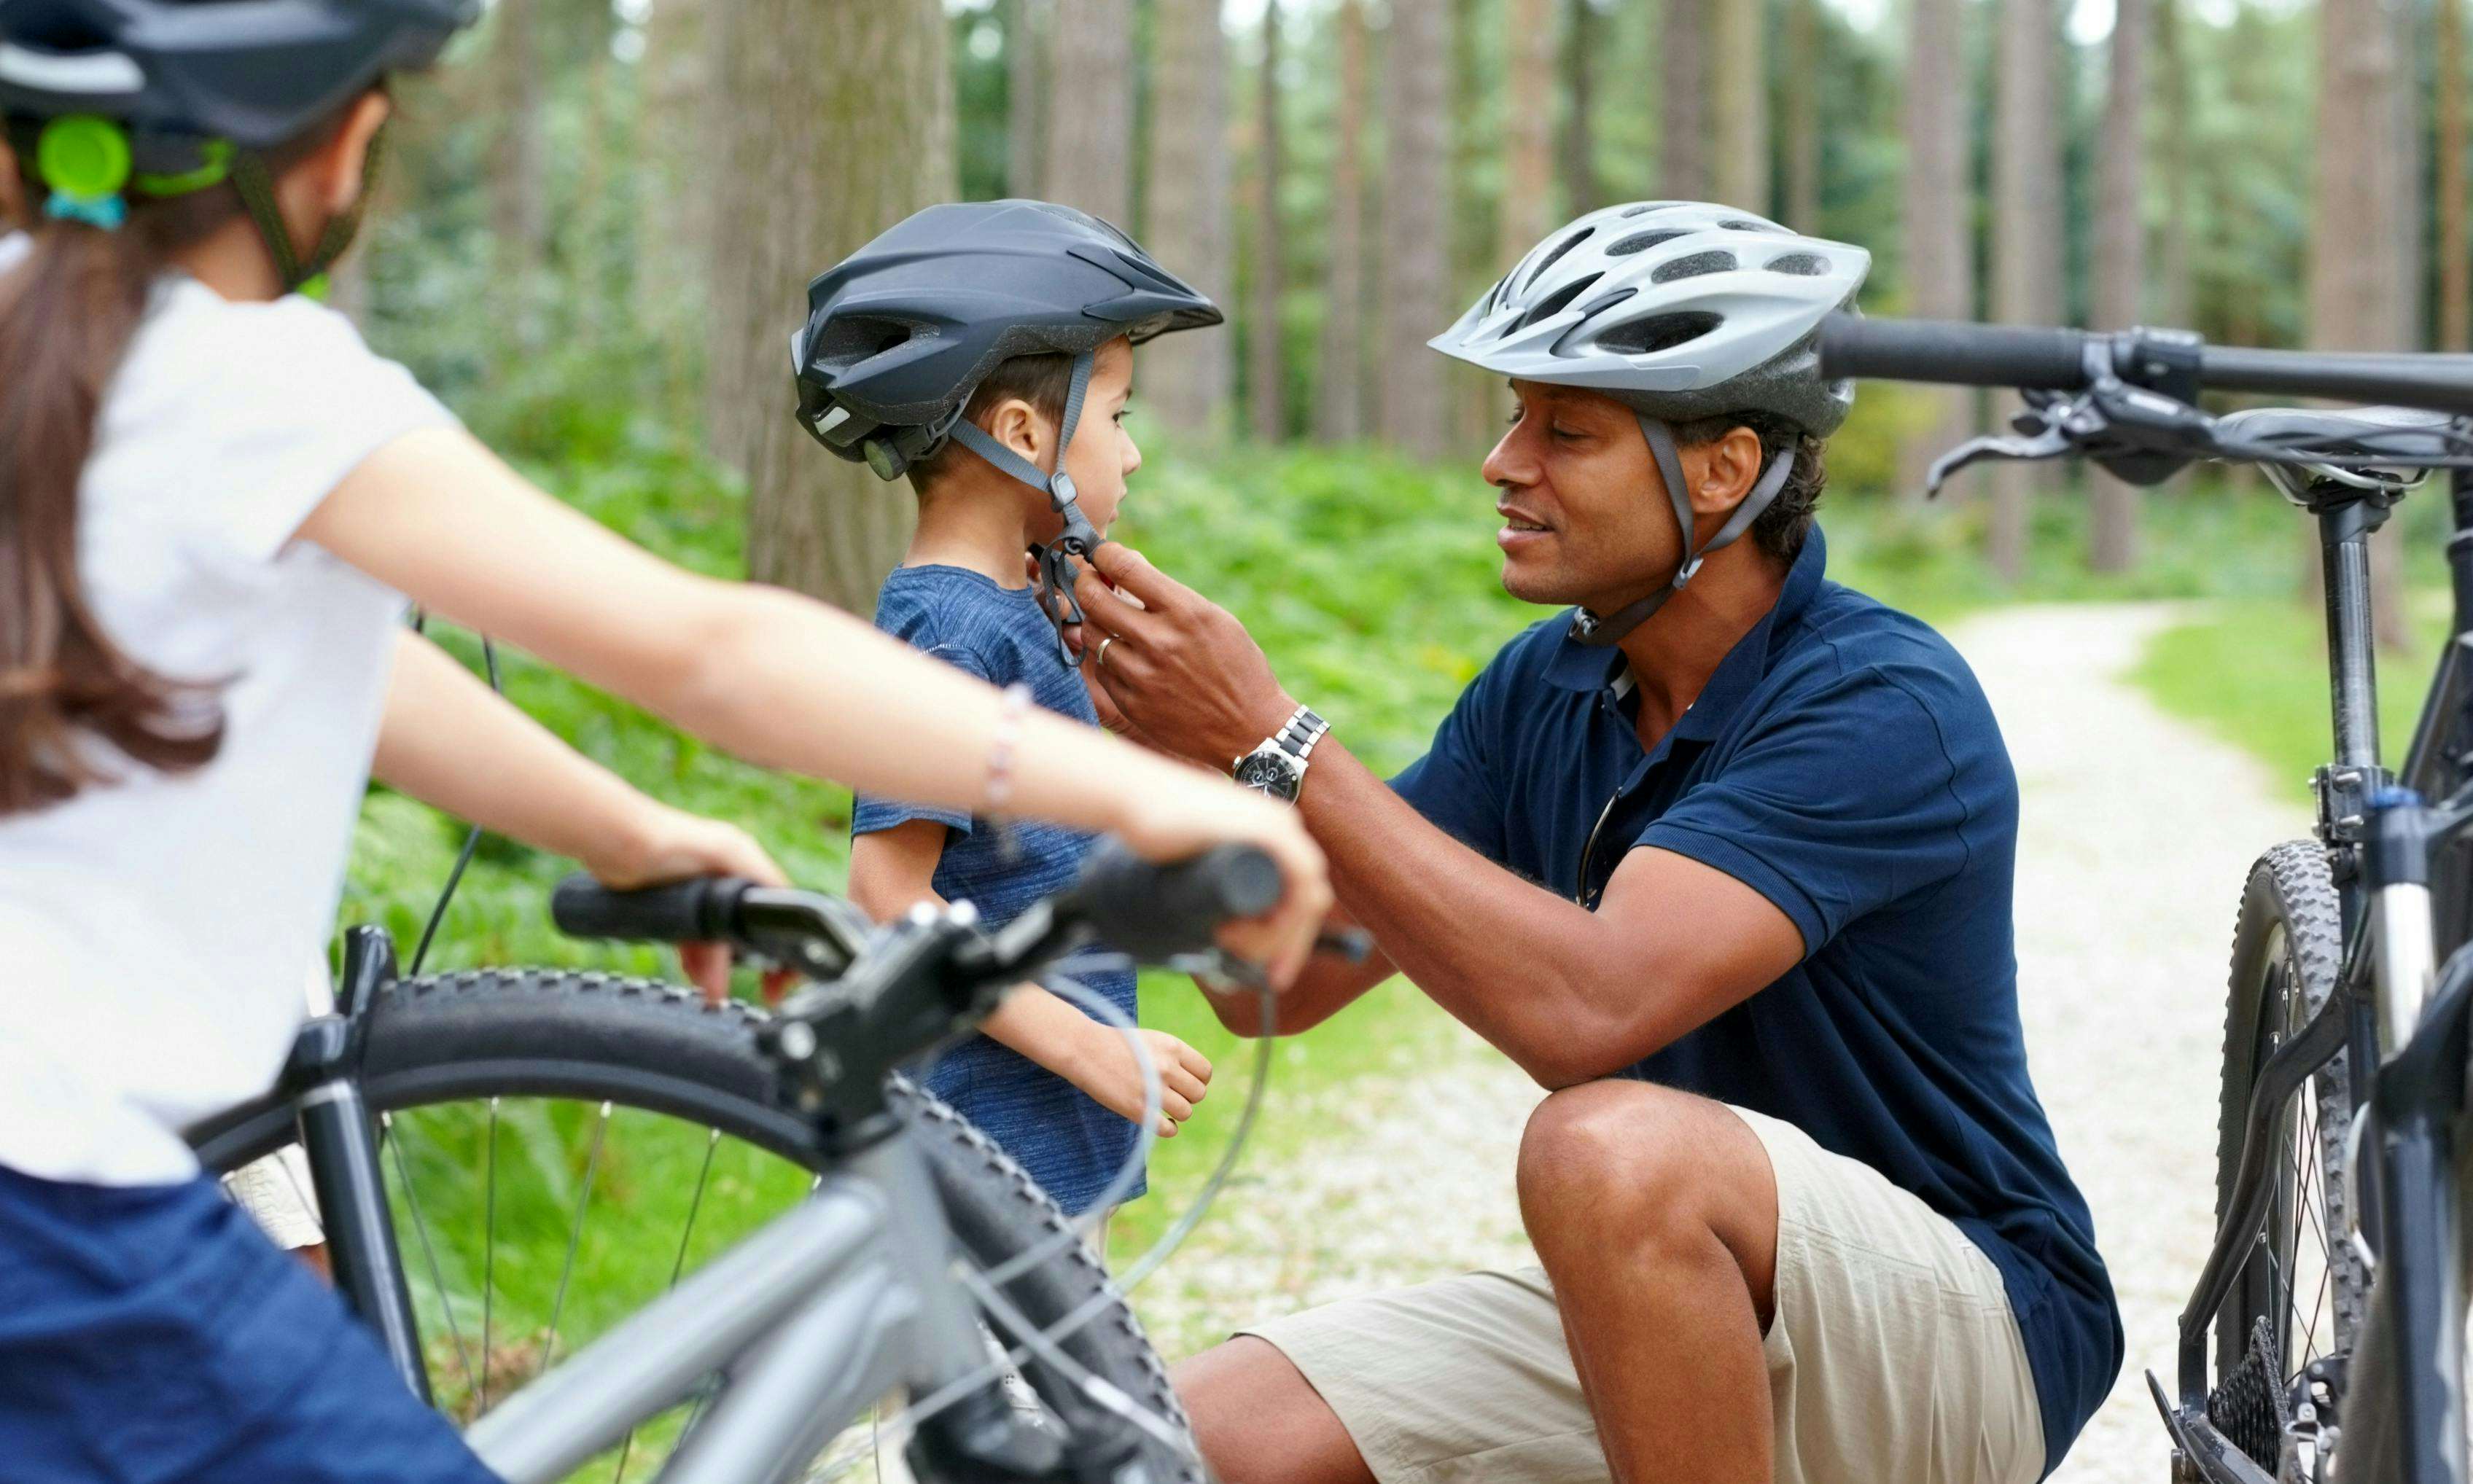 Dad putting a helmet on a young boy about to ride a bike